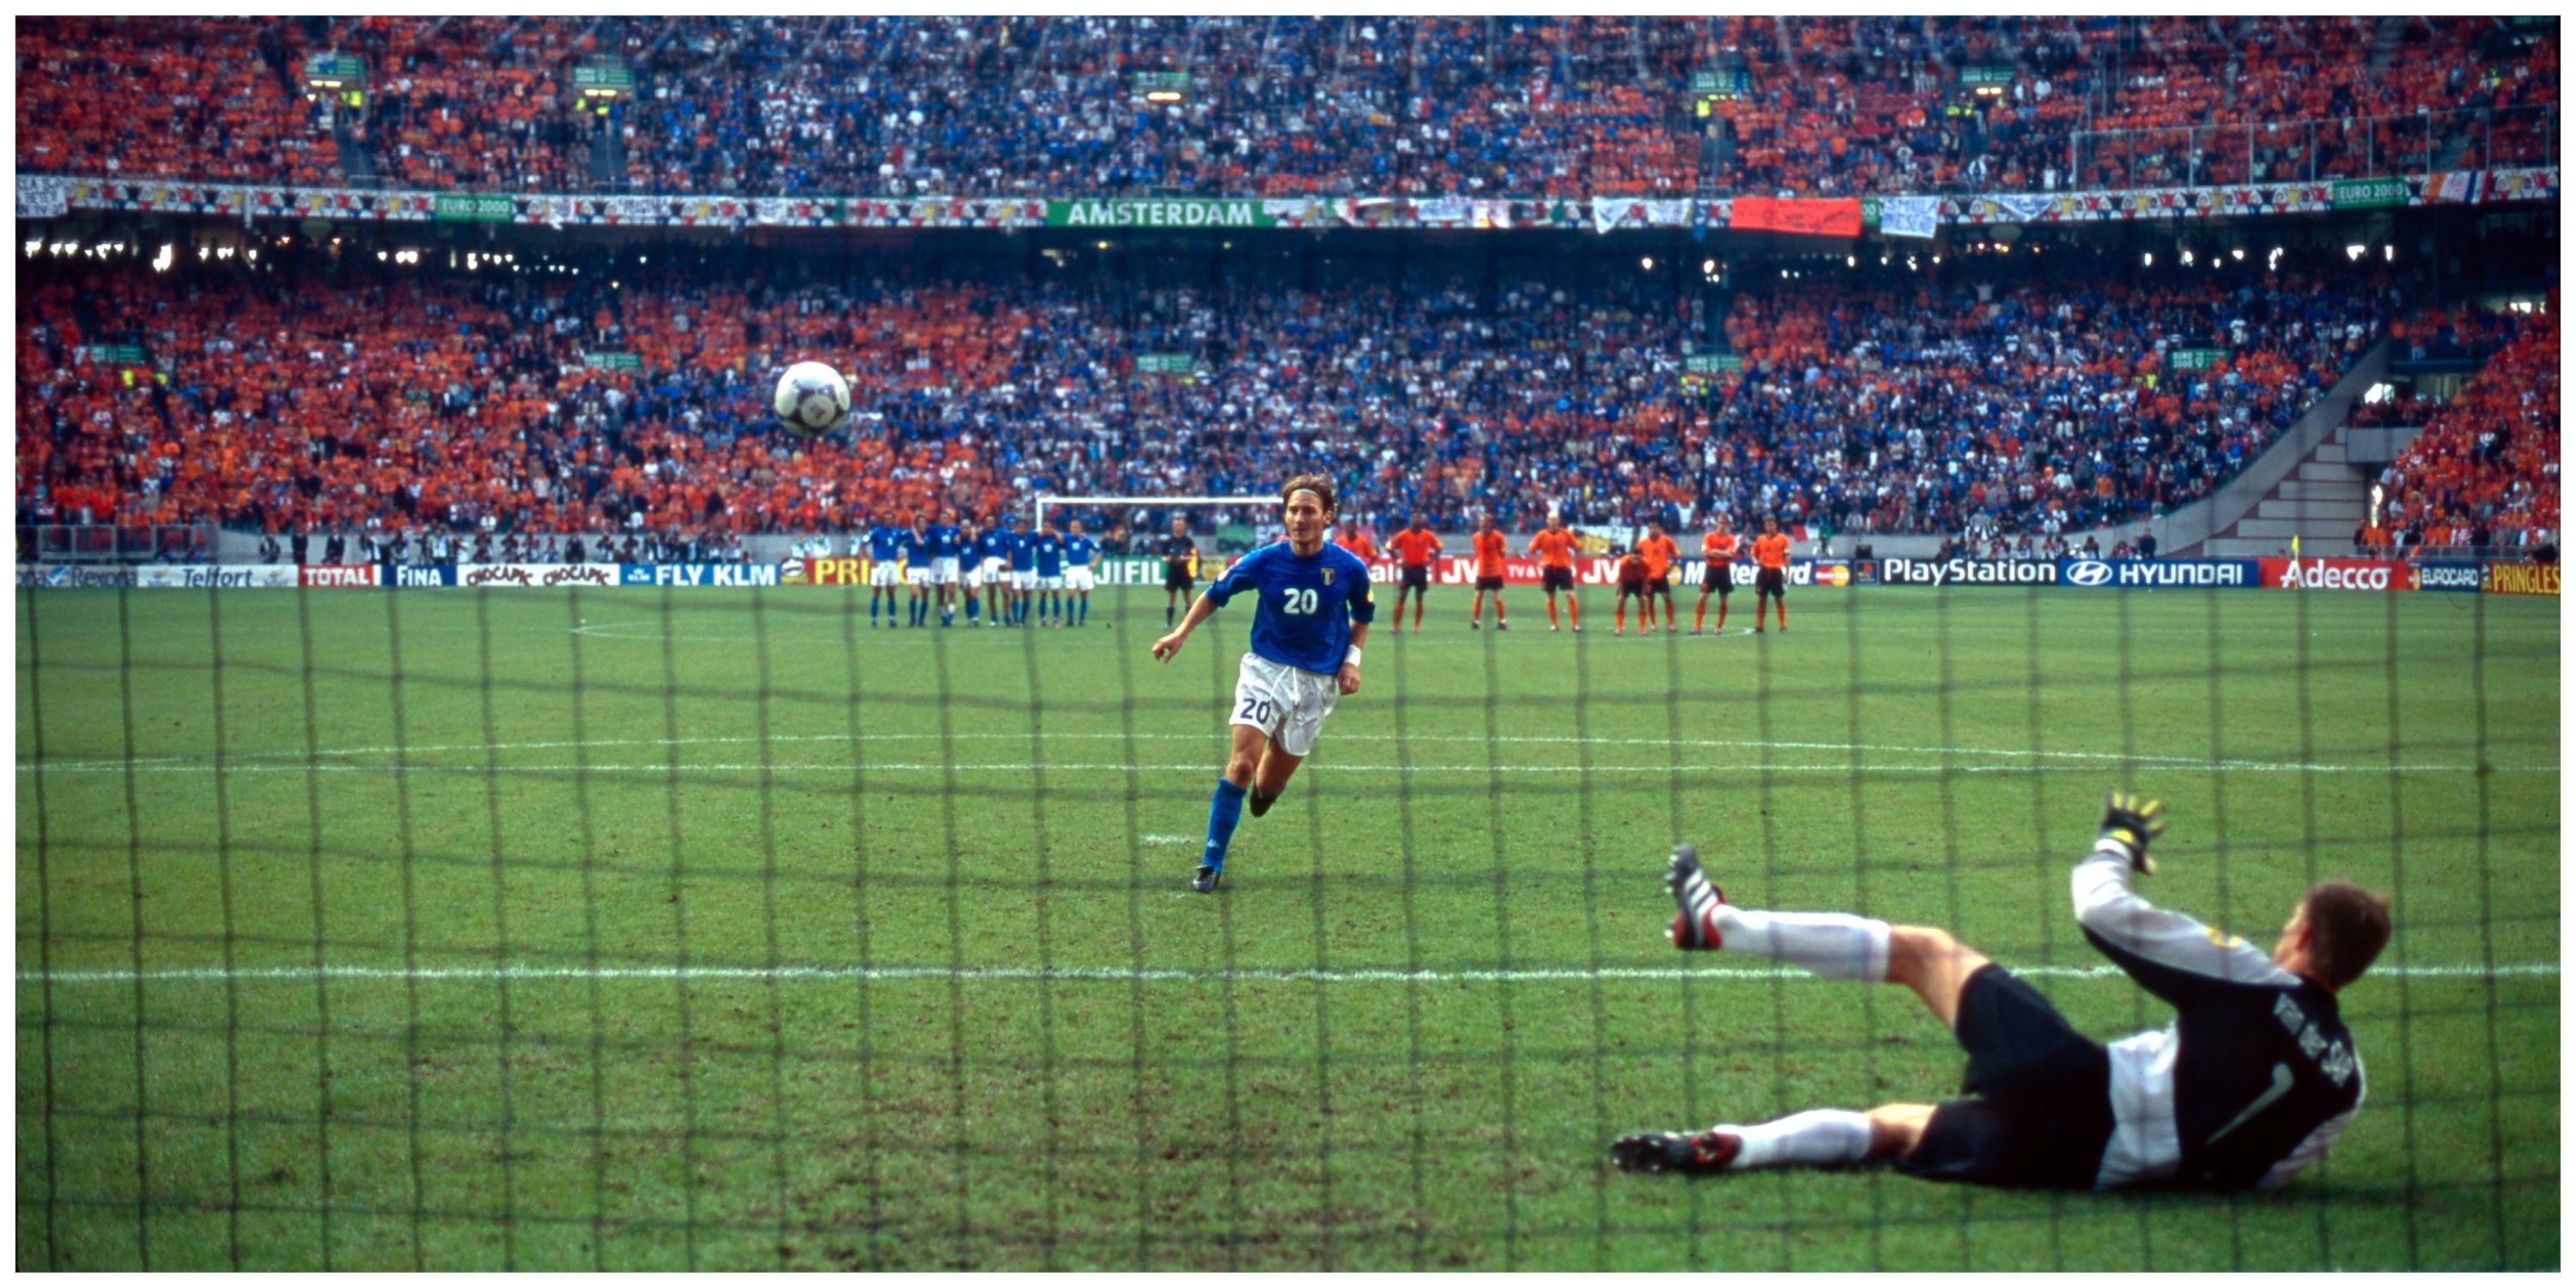 Francesco Totti took an outrageous penalty vs Netherlands at Euro 2000